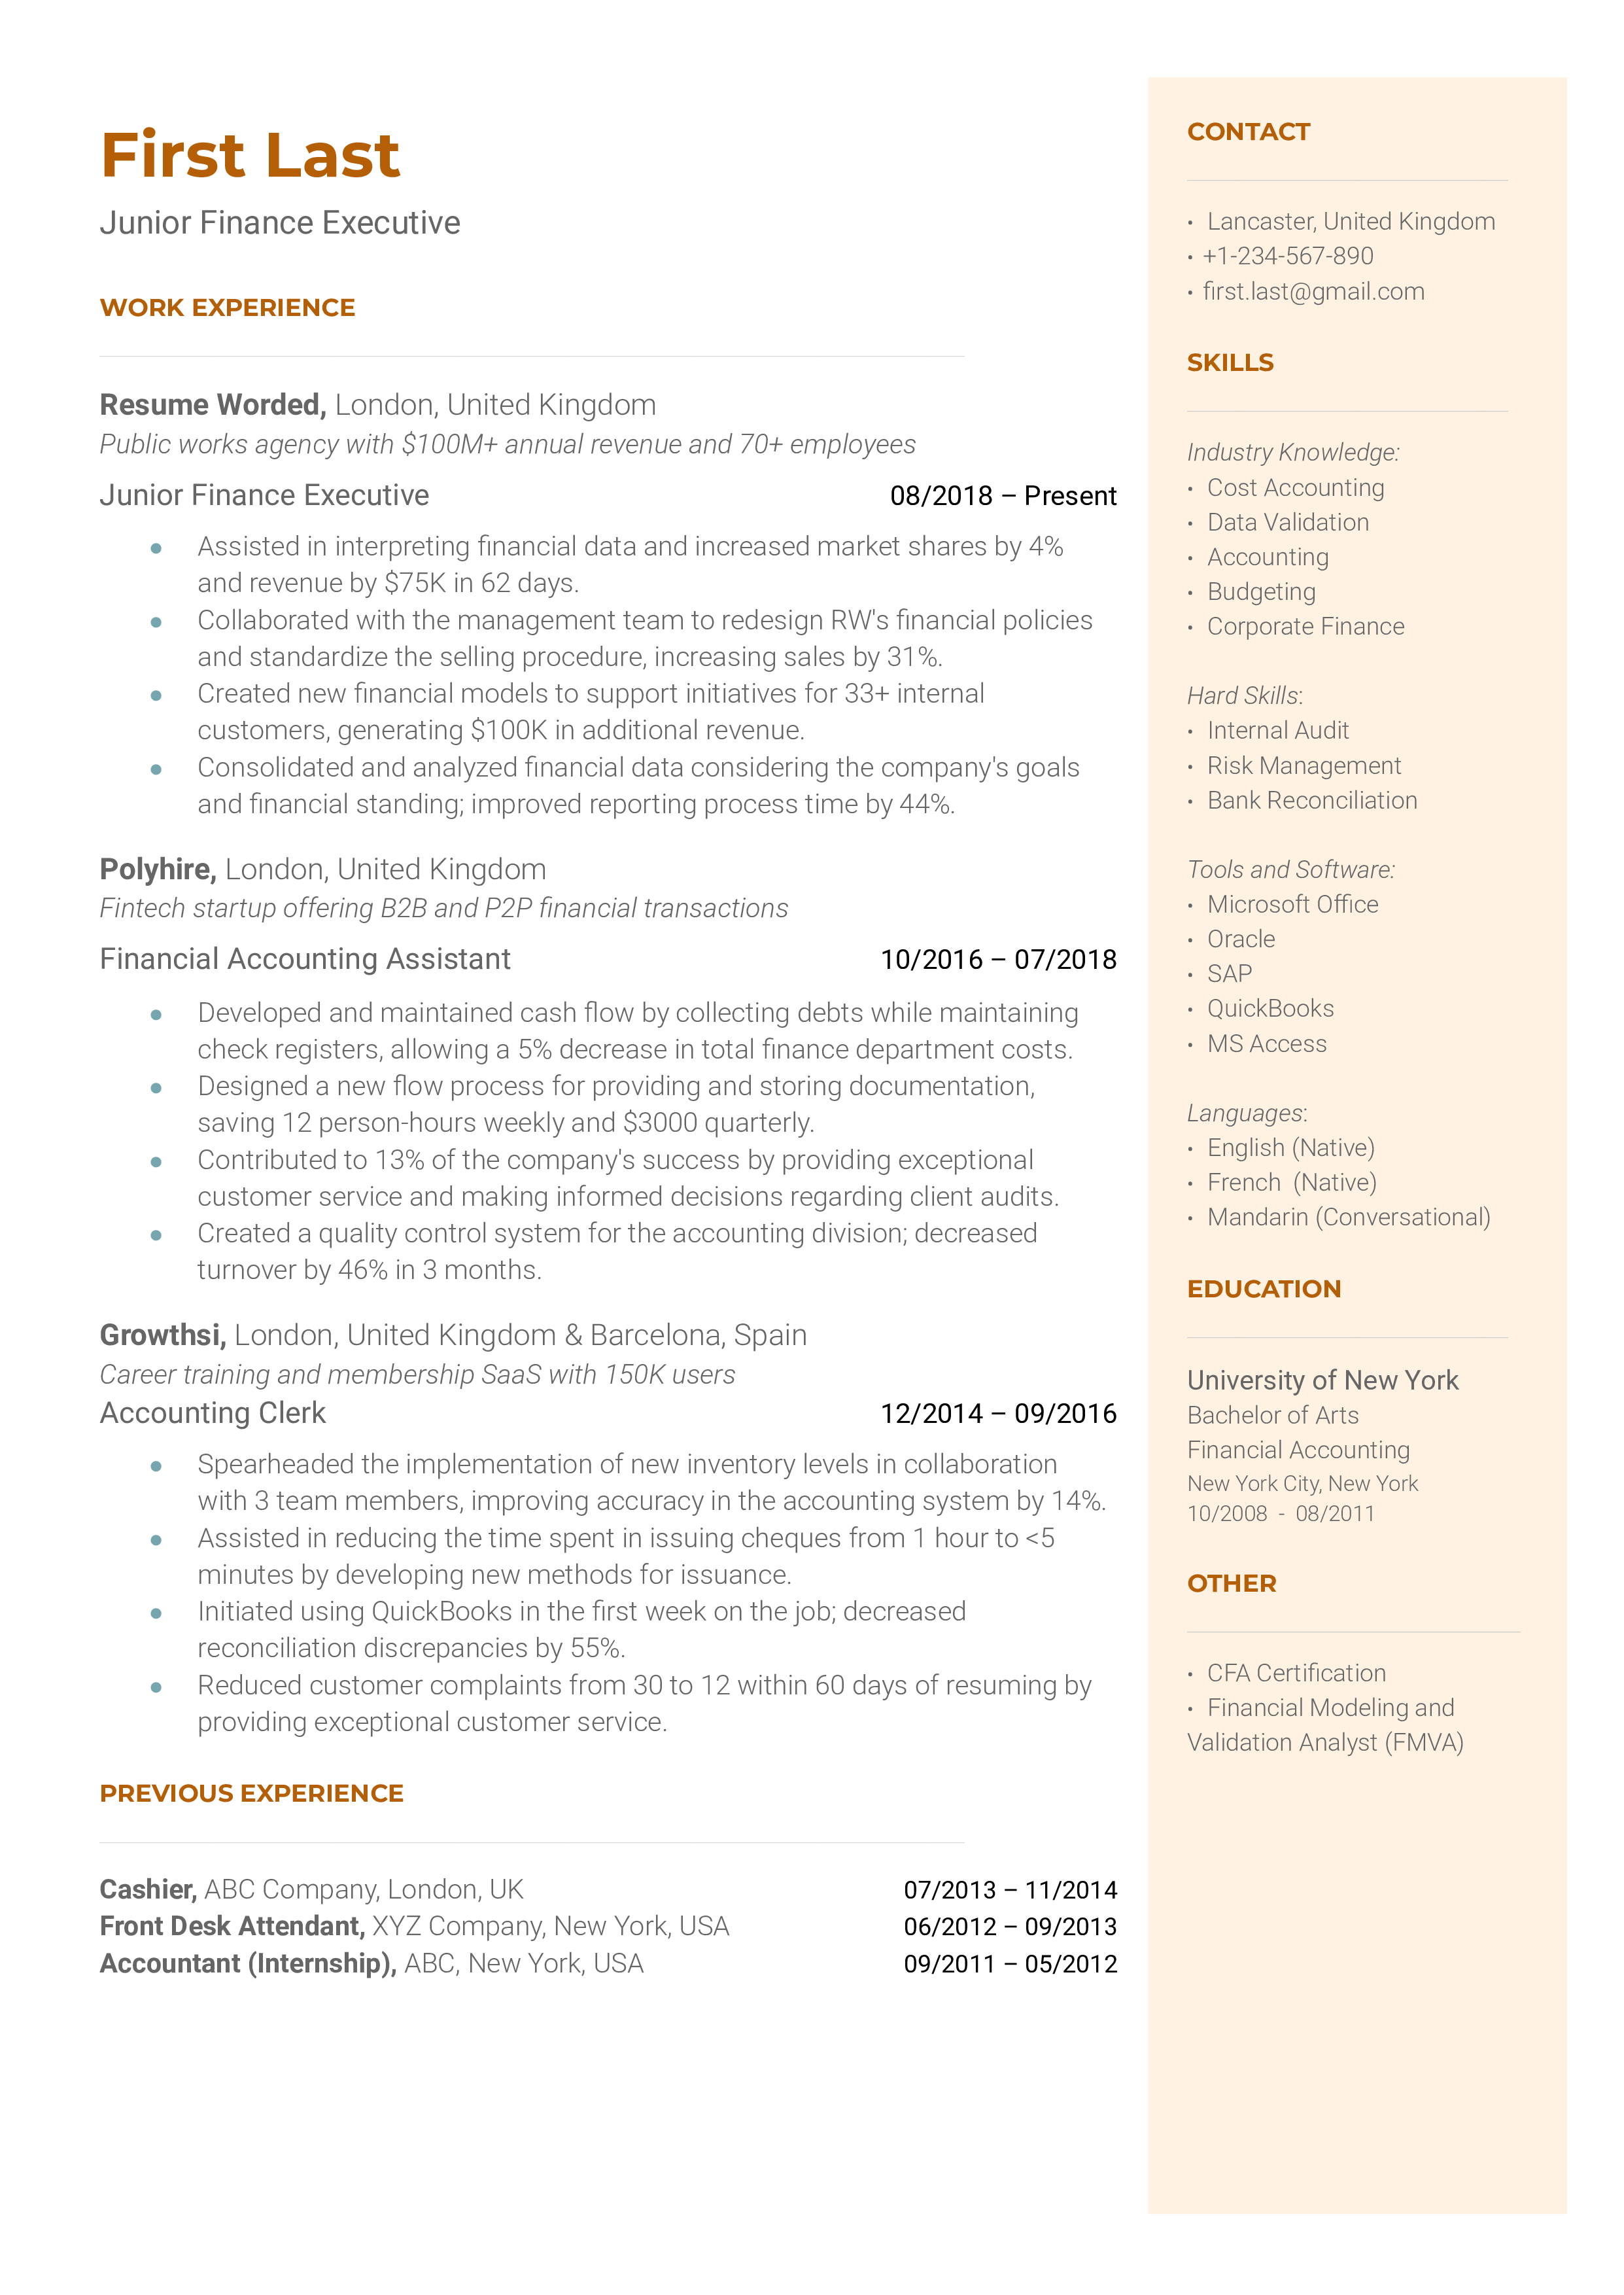 Junior finance executive resume sample that highlights the applicant’s related experience and relevant certifications.